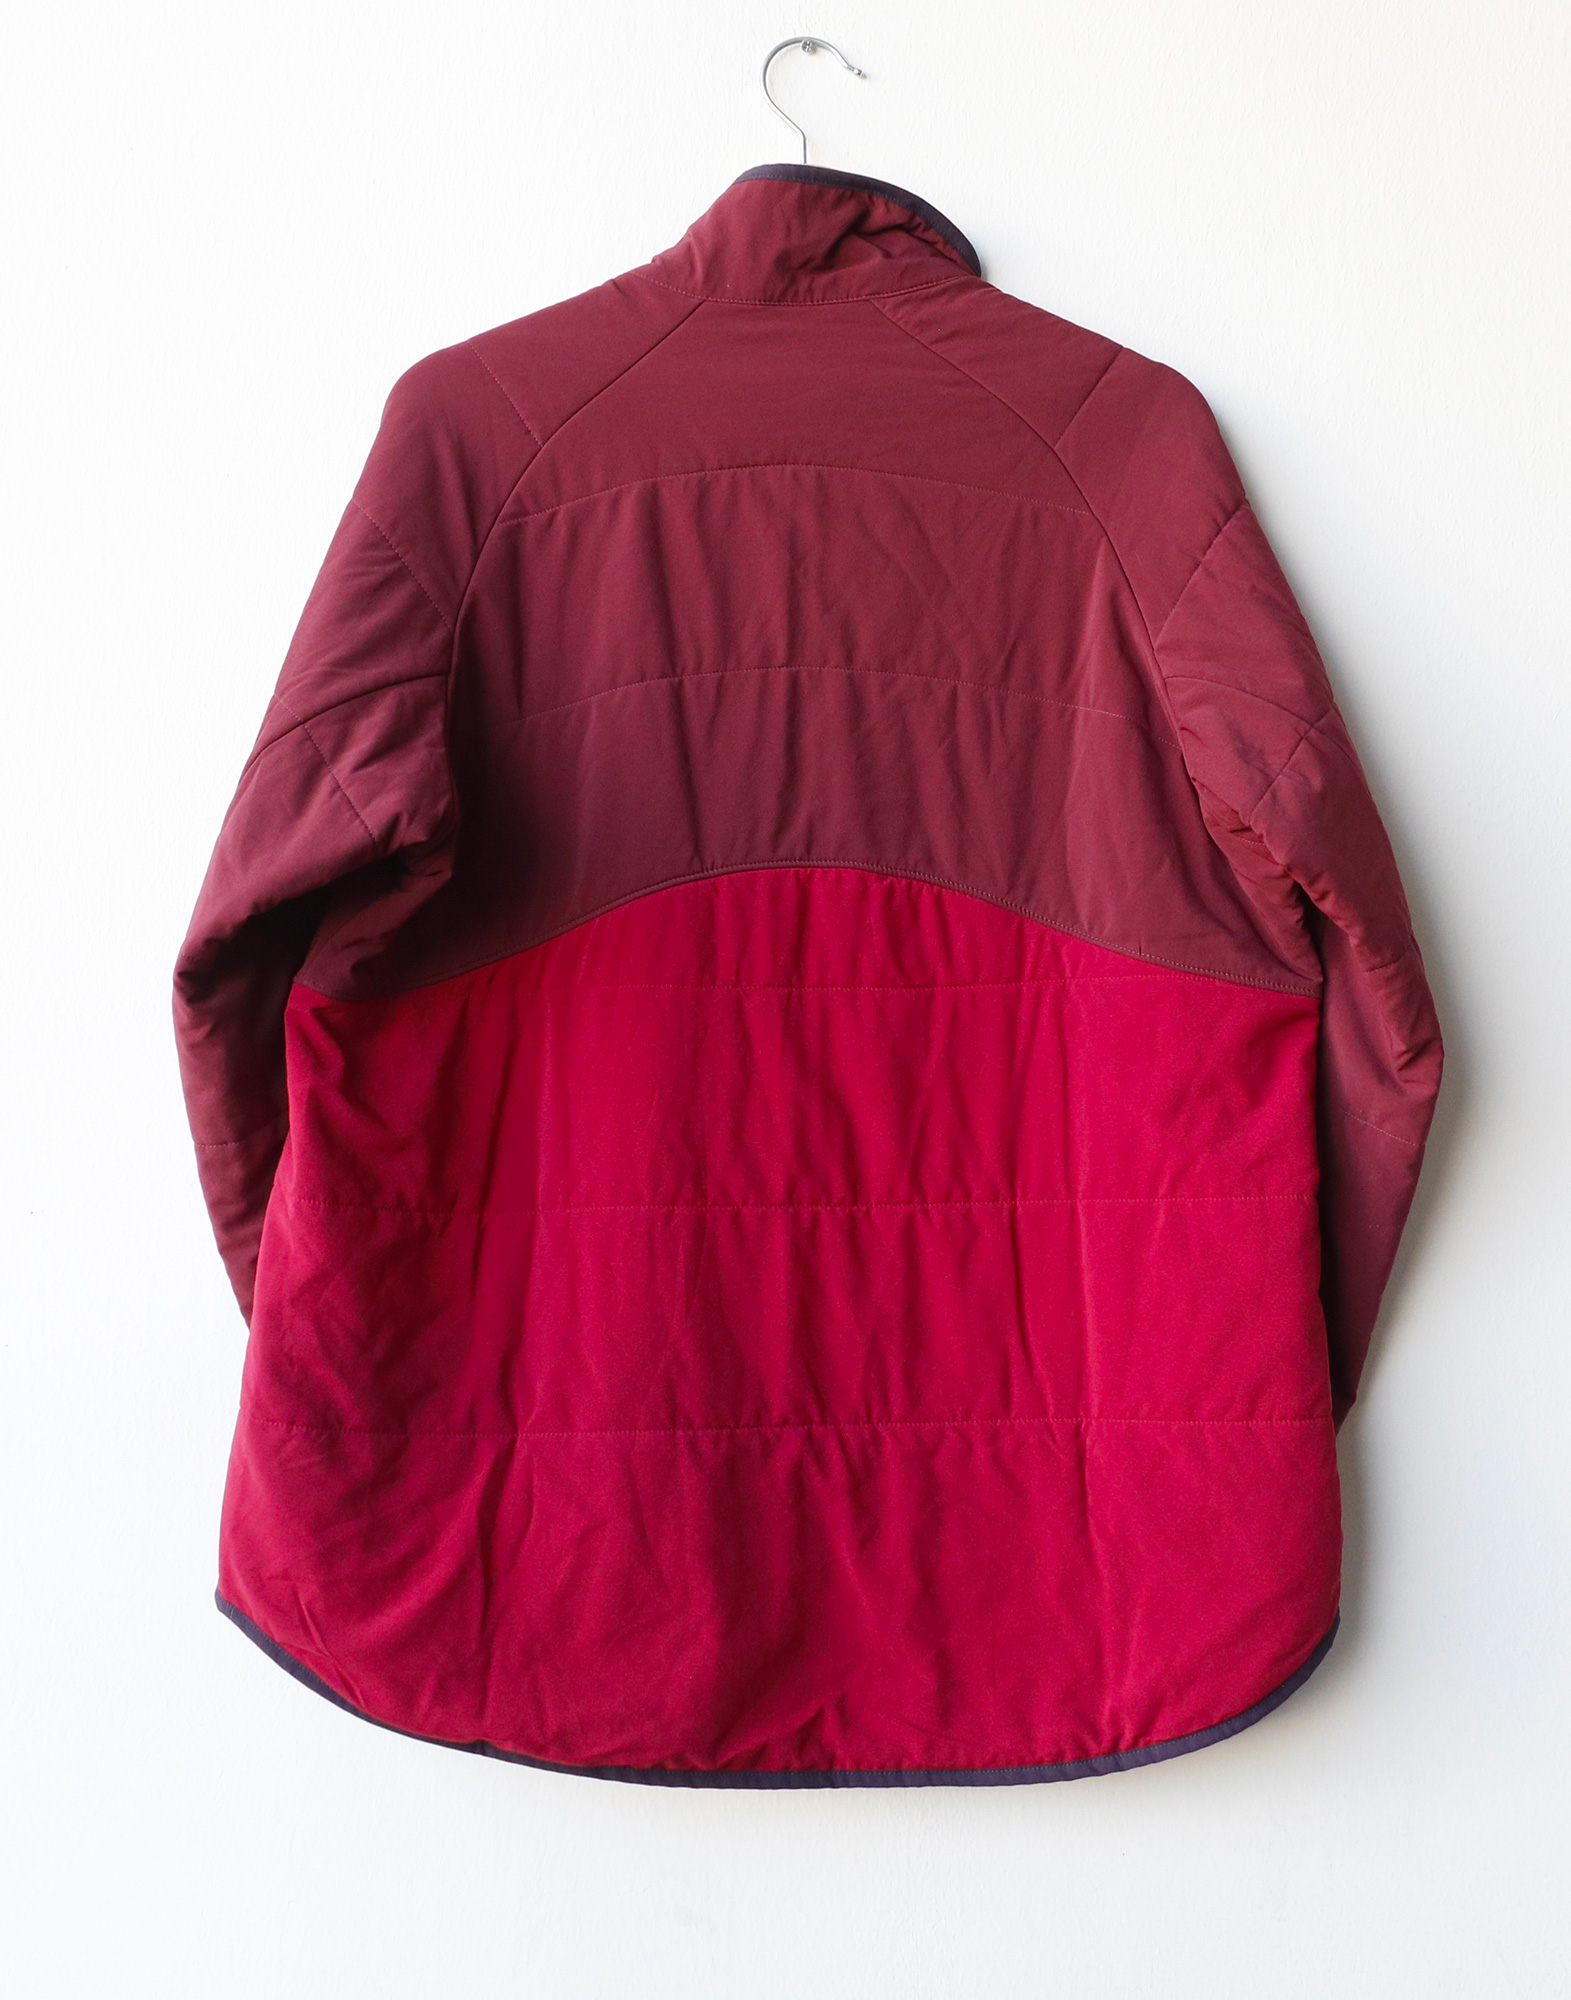 Patagonia - Recycled polyester jacket